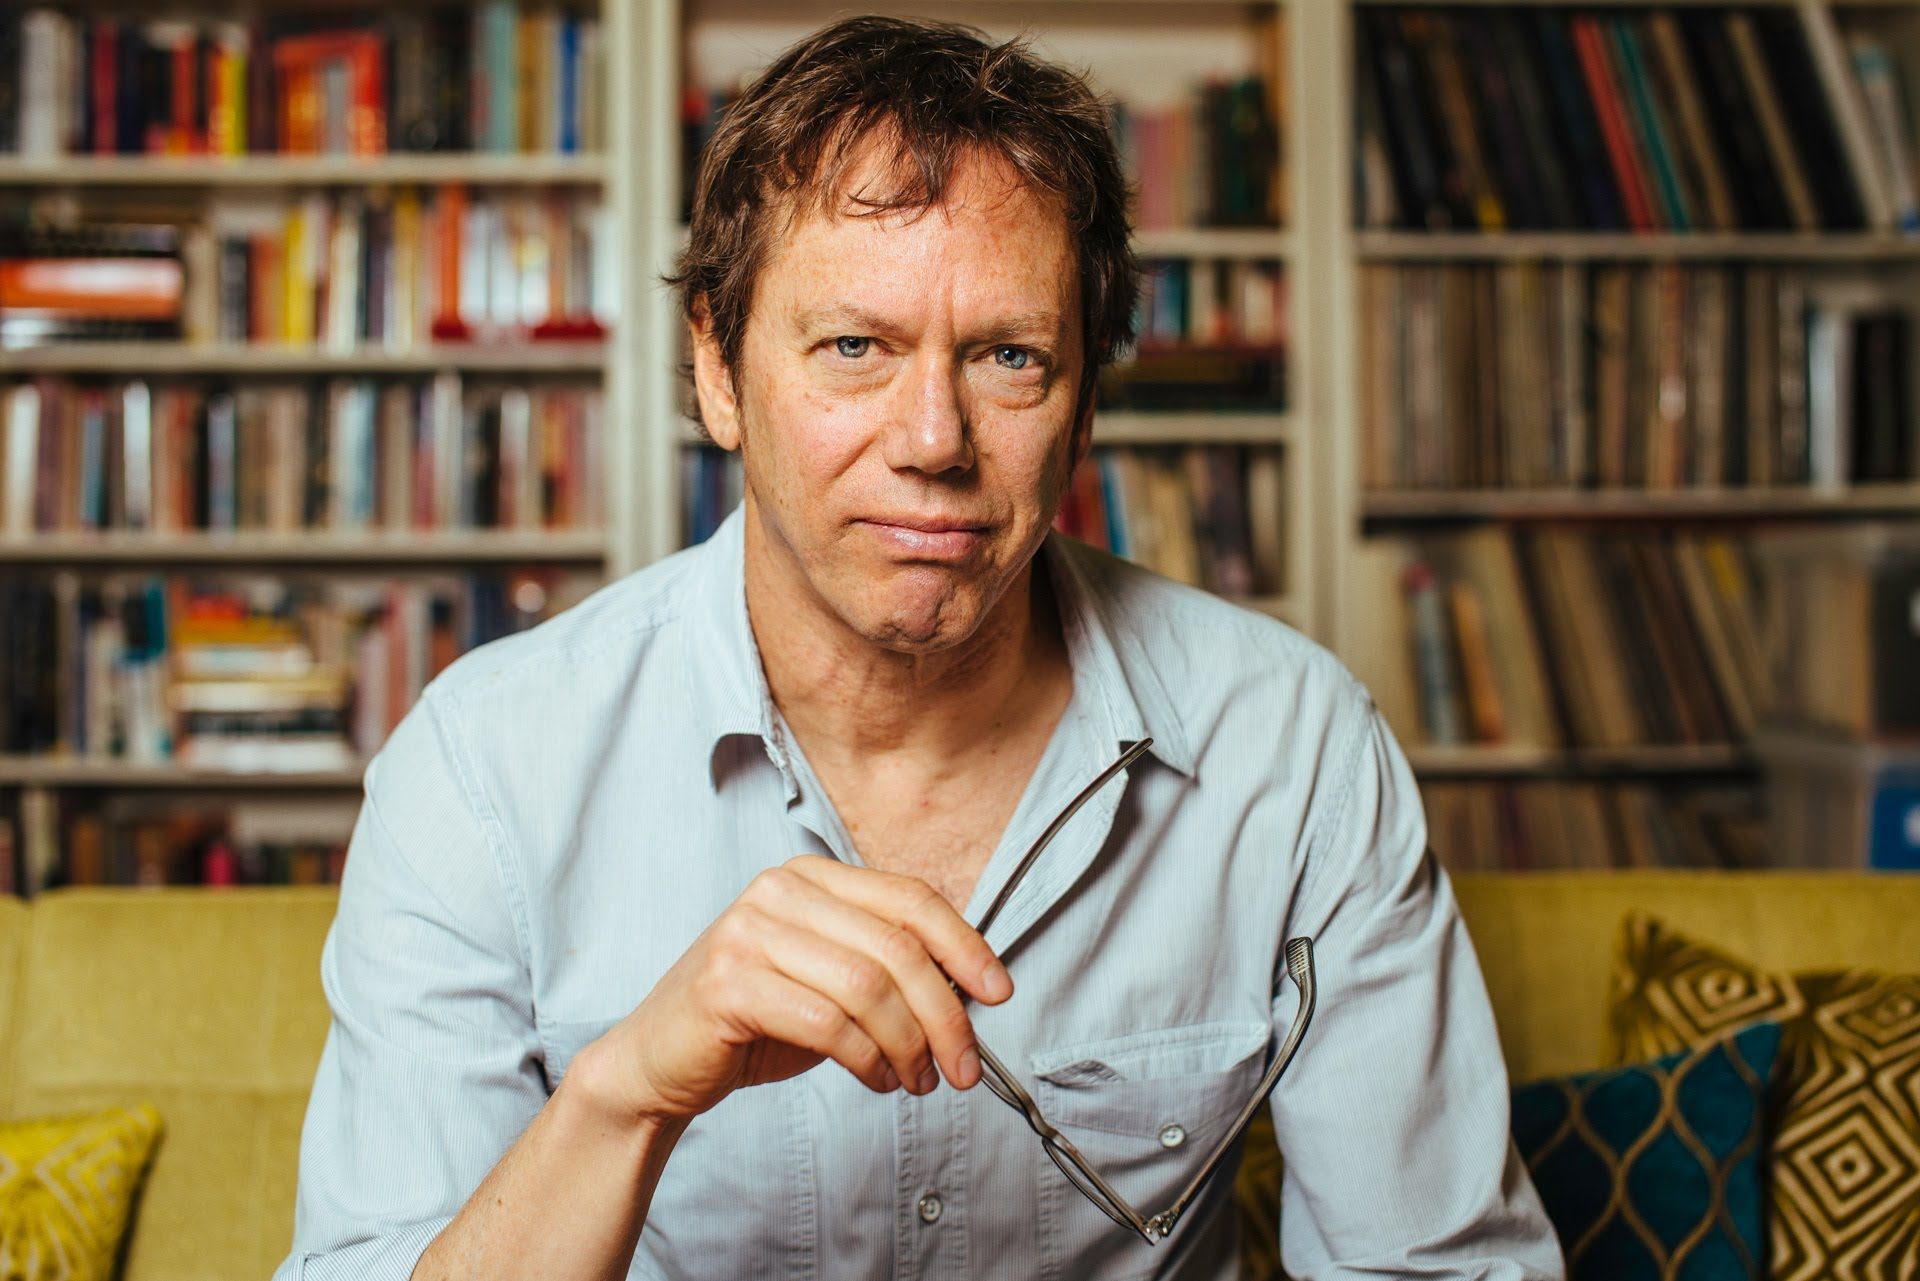 Robert Greene on Embracing Loneliness and Dealing with Power